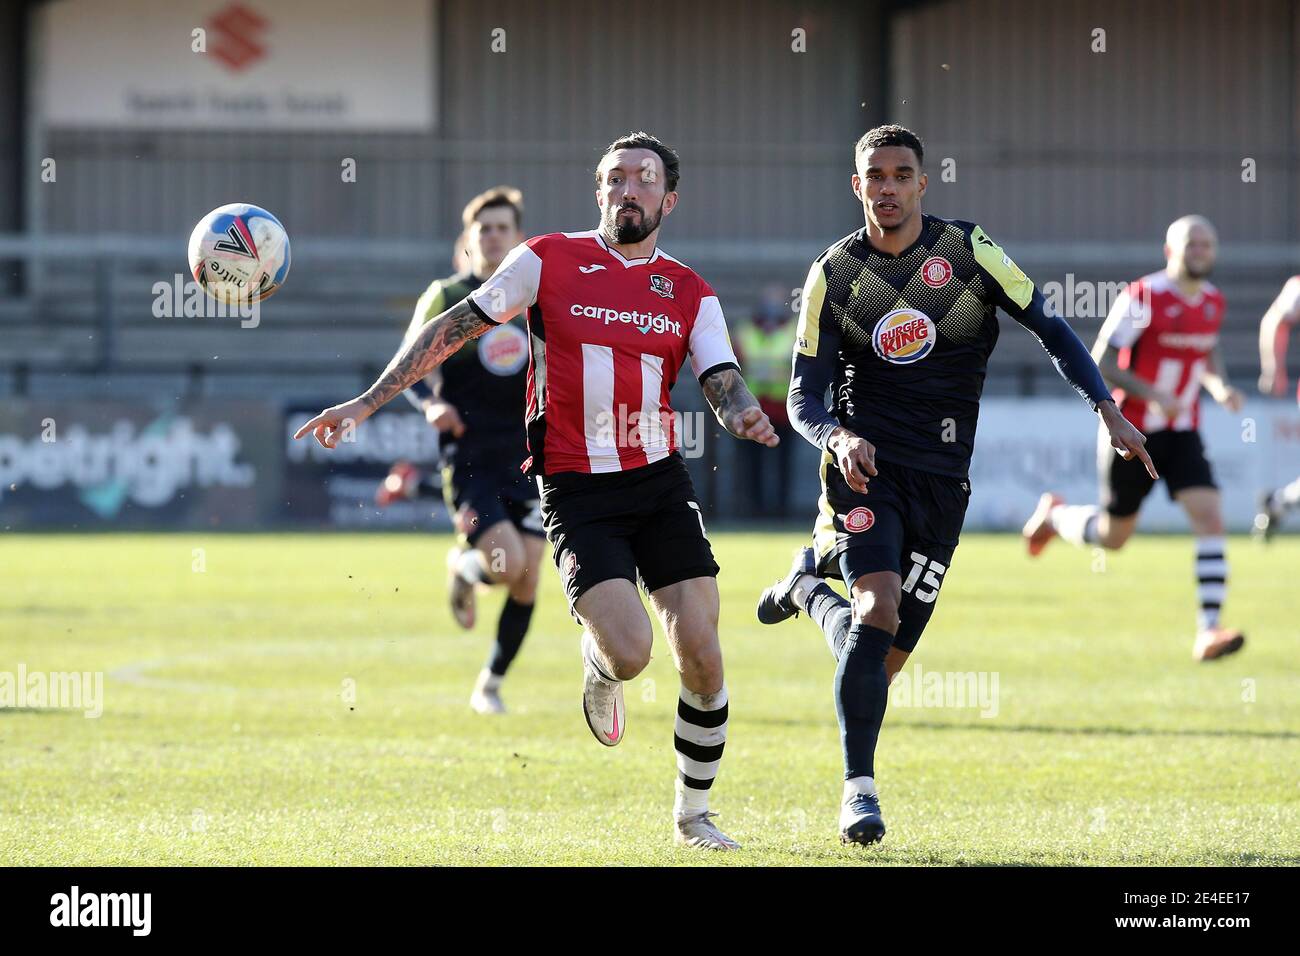 Exeter, UK. 23rd Jan, 2021. Ryan Bowman of Exeter City and Terence Vancooten of Stevenage during the Sky Bet League 2 behind closed doors match between Exeter City and Stevenage at St James' Park, Exeter, England on 23 January 2021. Photo by Dave Peters/PRiME Media Images. Credit: PRiME Media Images/Alamy Live News Stock Photo